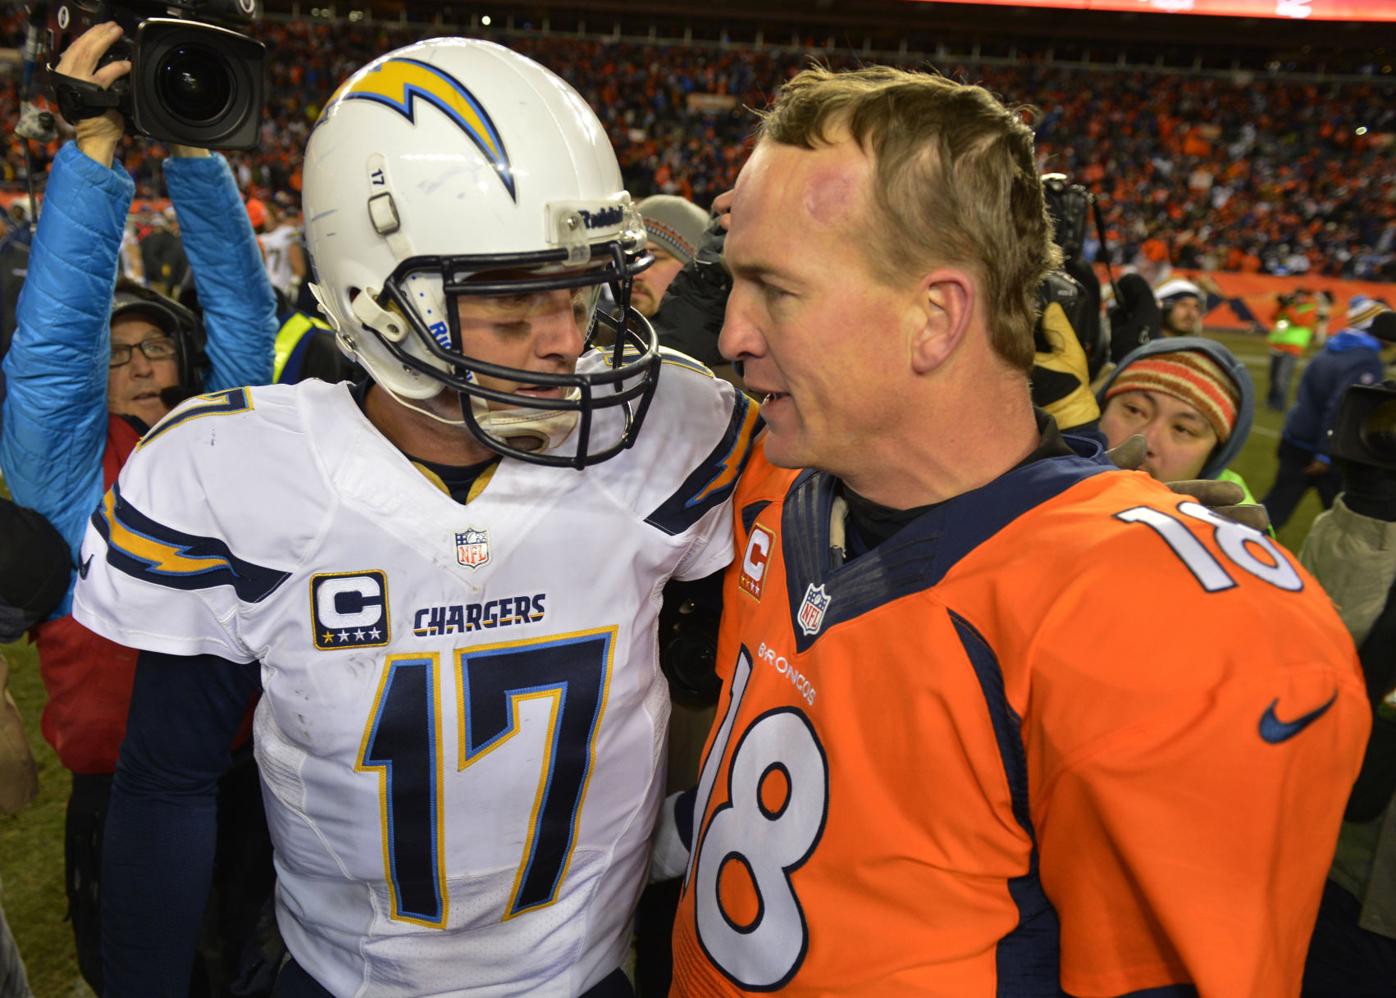 Manning won't laugh if Chargers manage keep-away encore, Sports